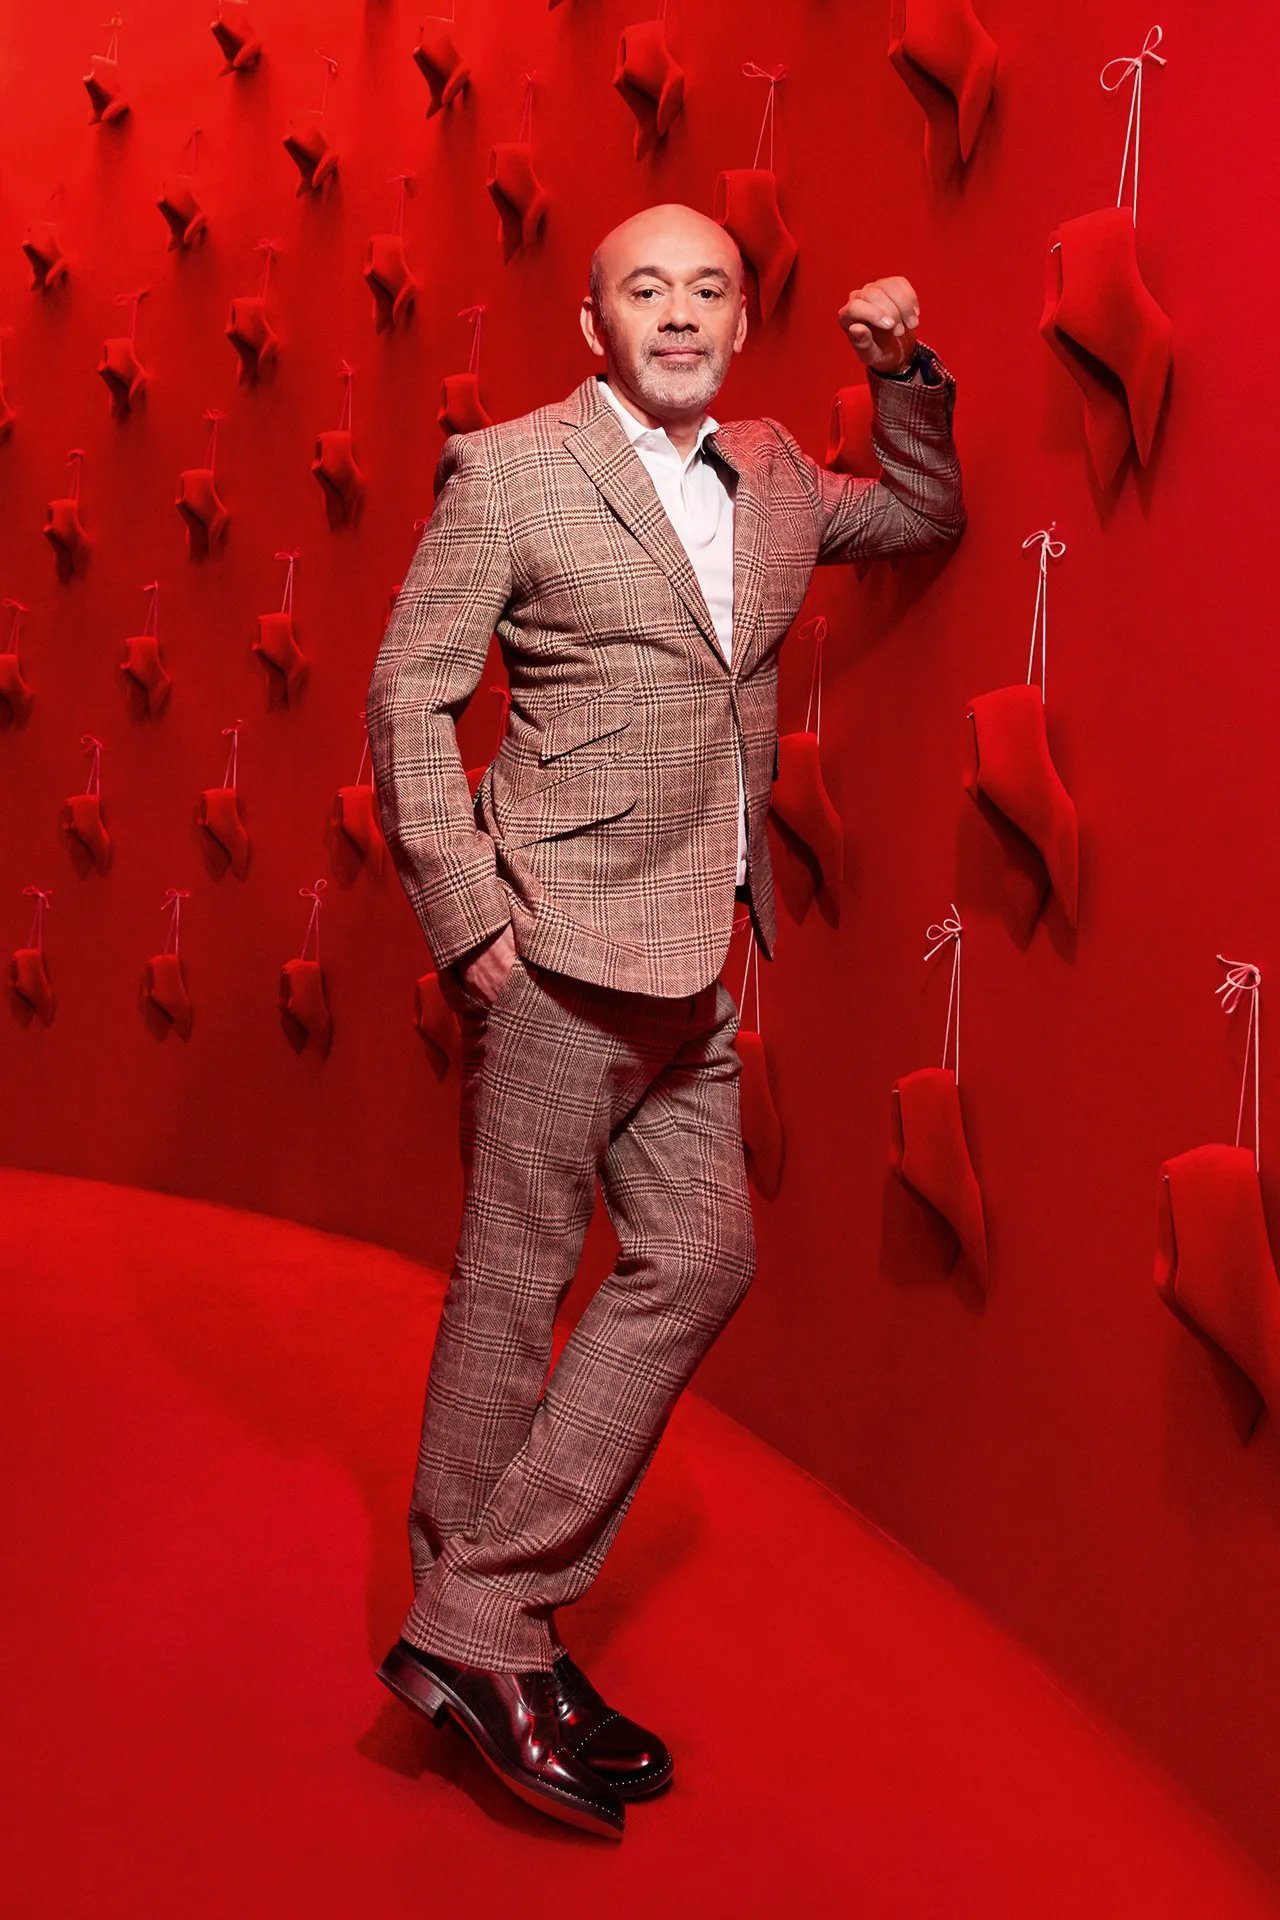 Christian Louboutin Shoes: Iconic Red Soles and Luxury Style